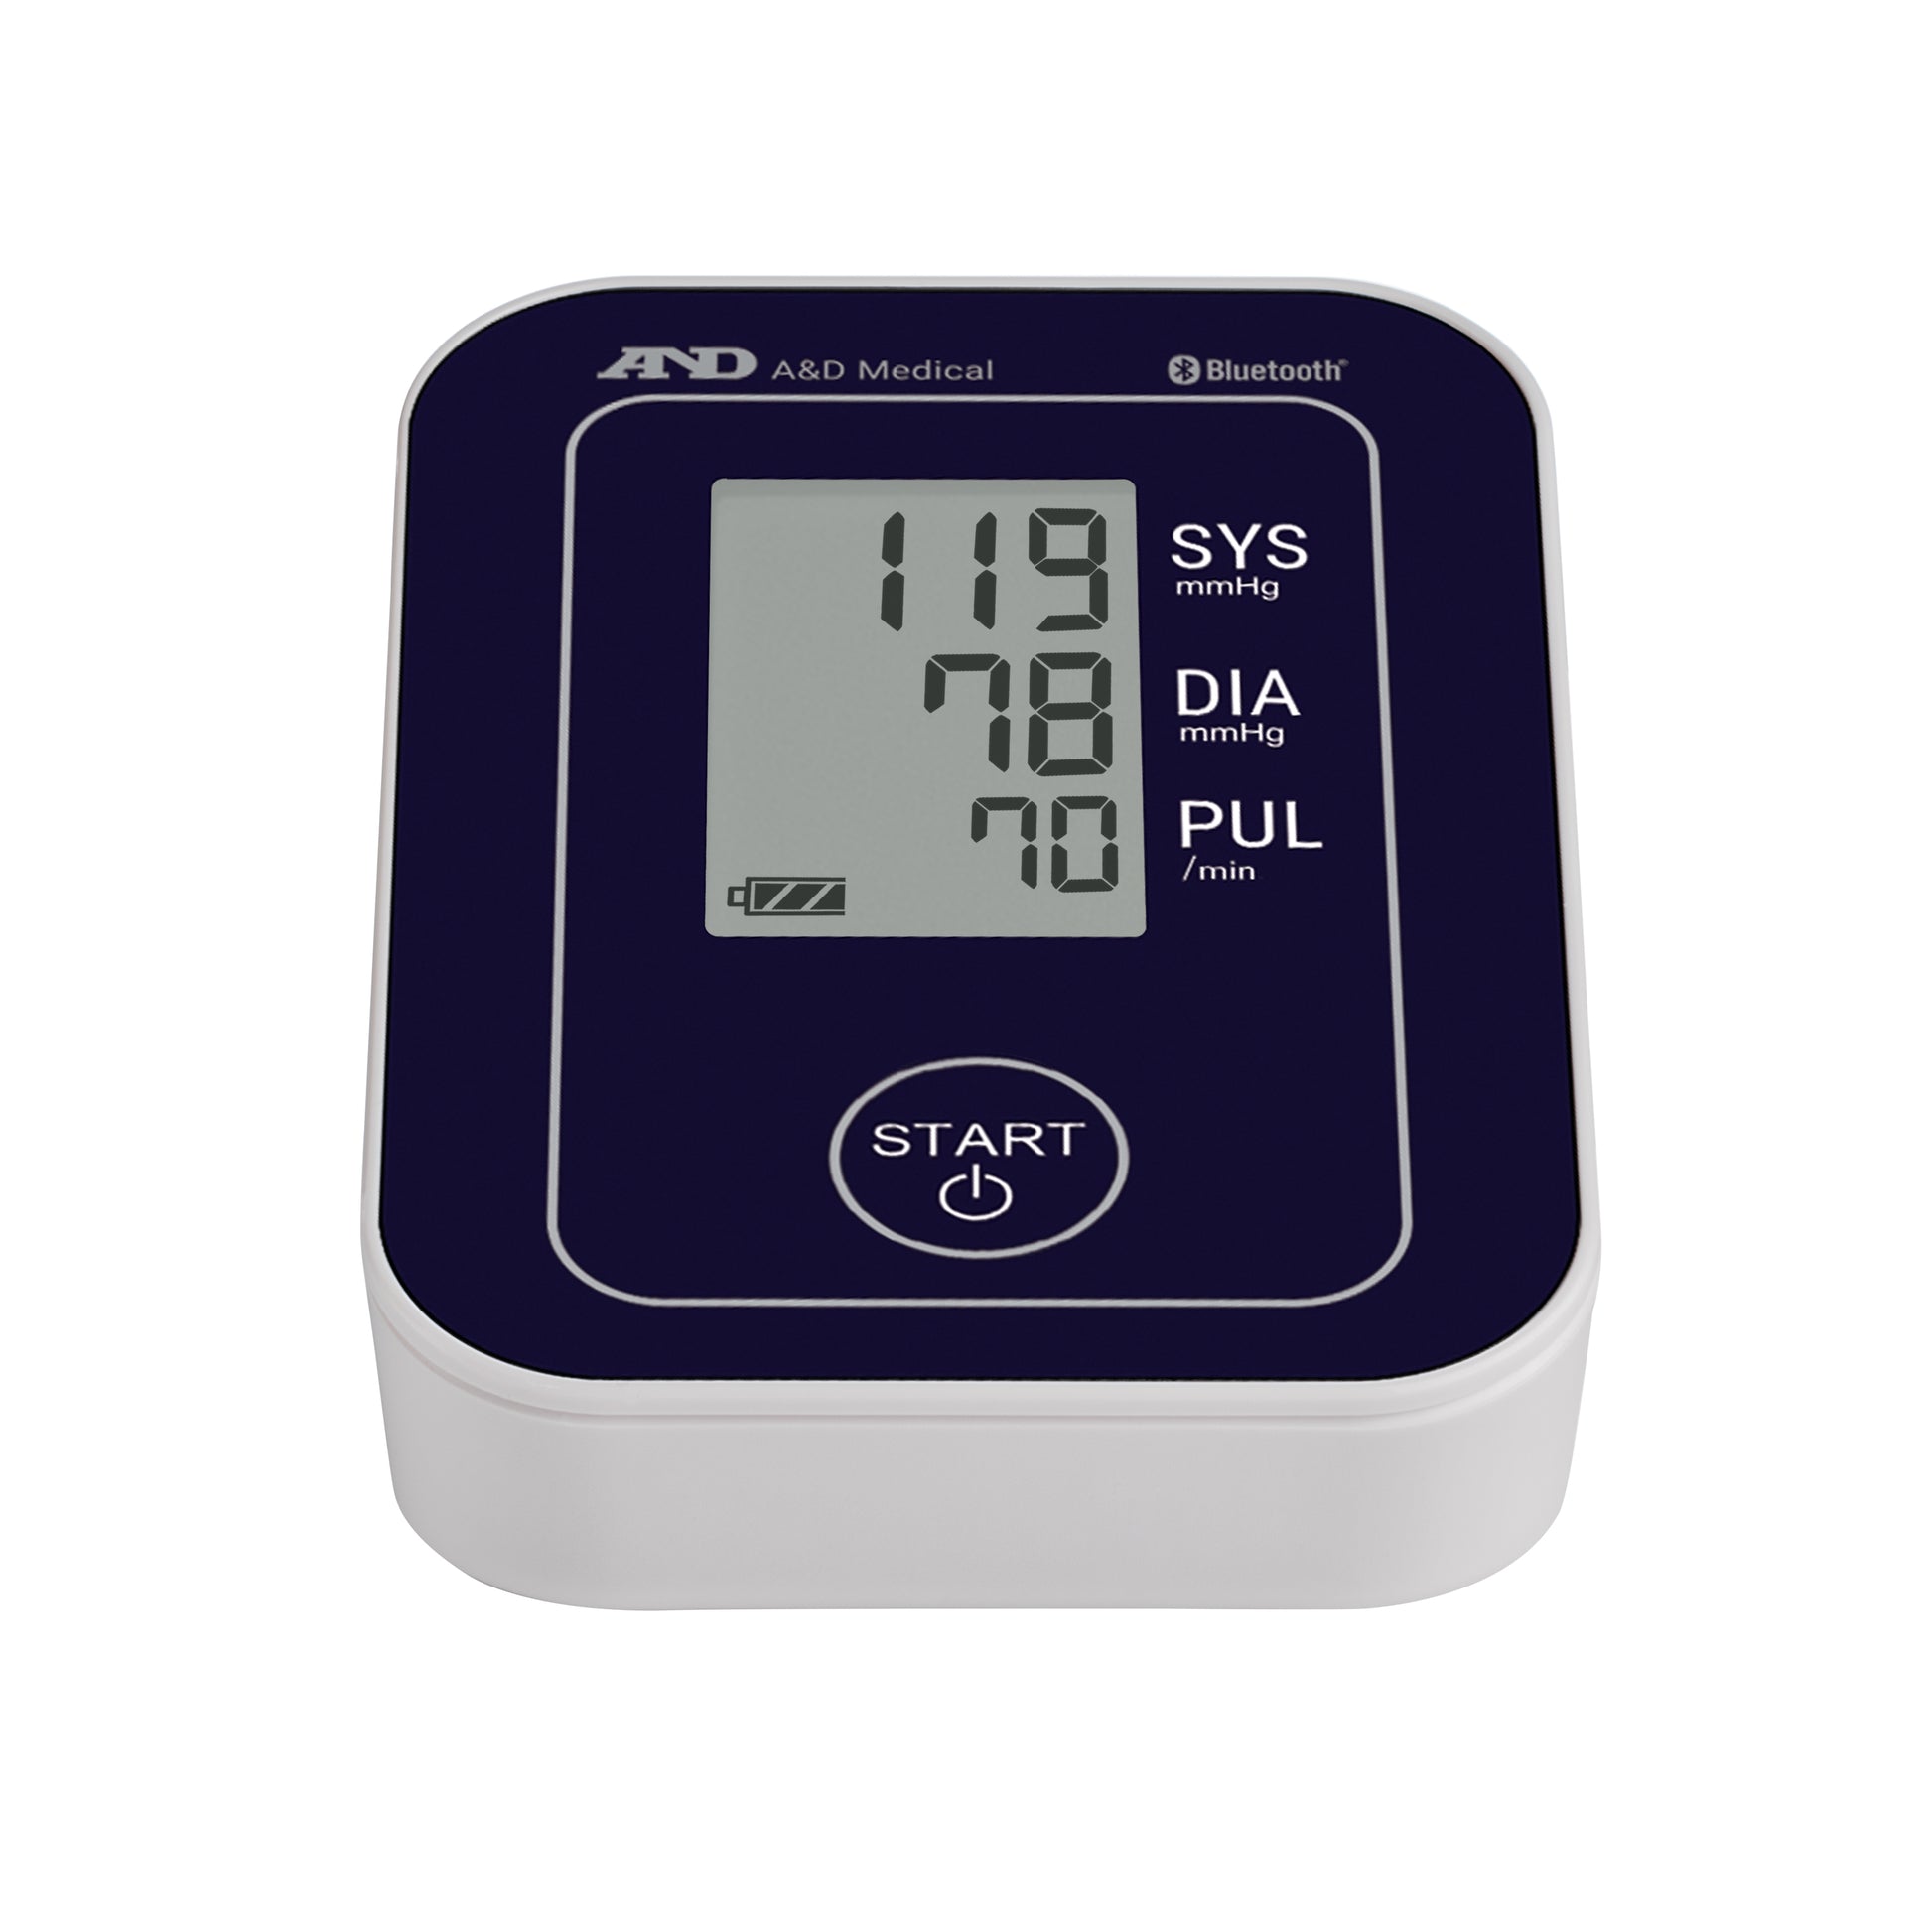 CE ISO Approved Dr Trust FDA Digital Bp Monitor Electronic High